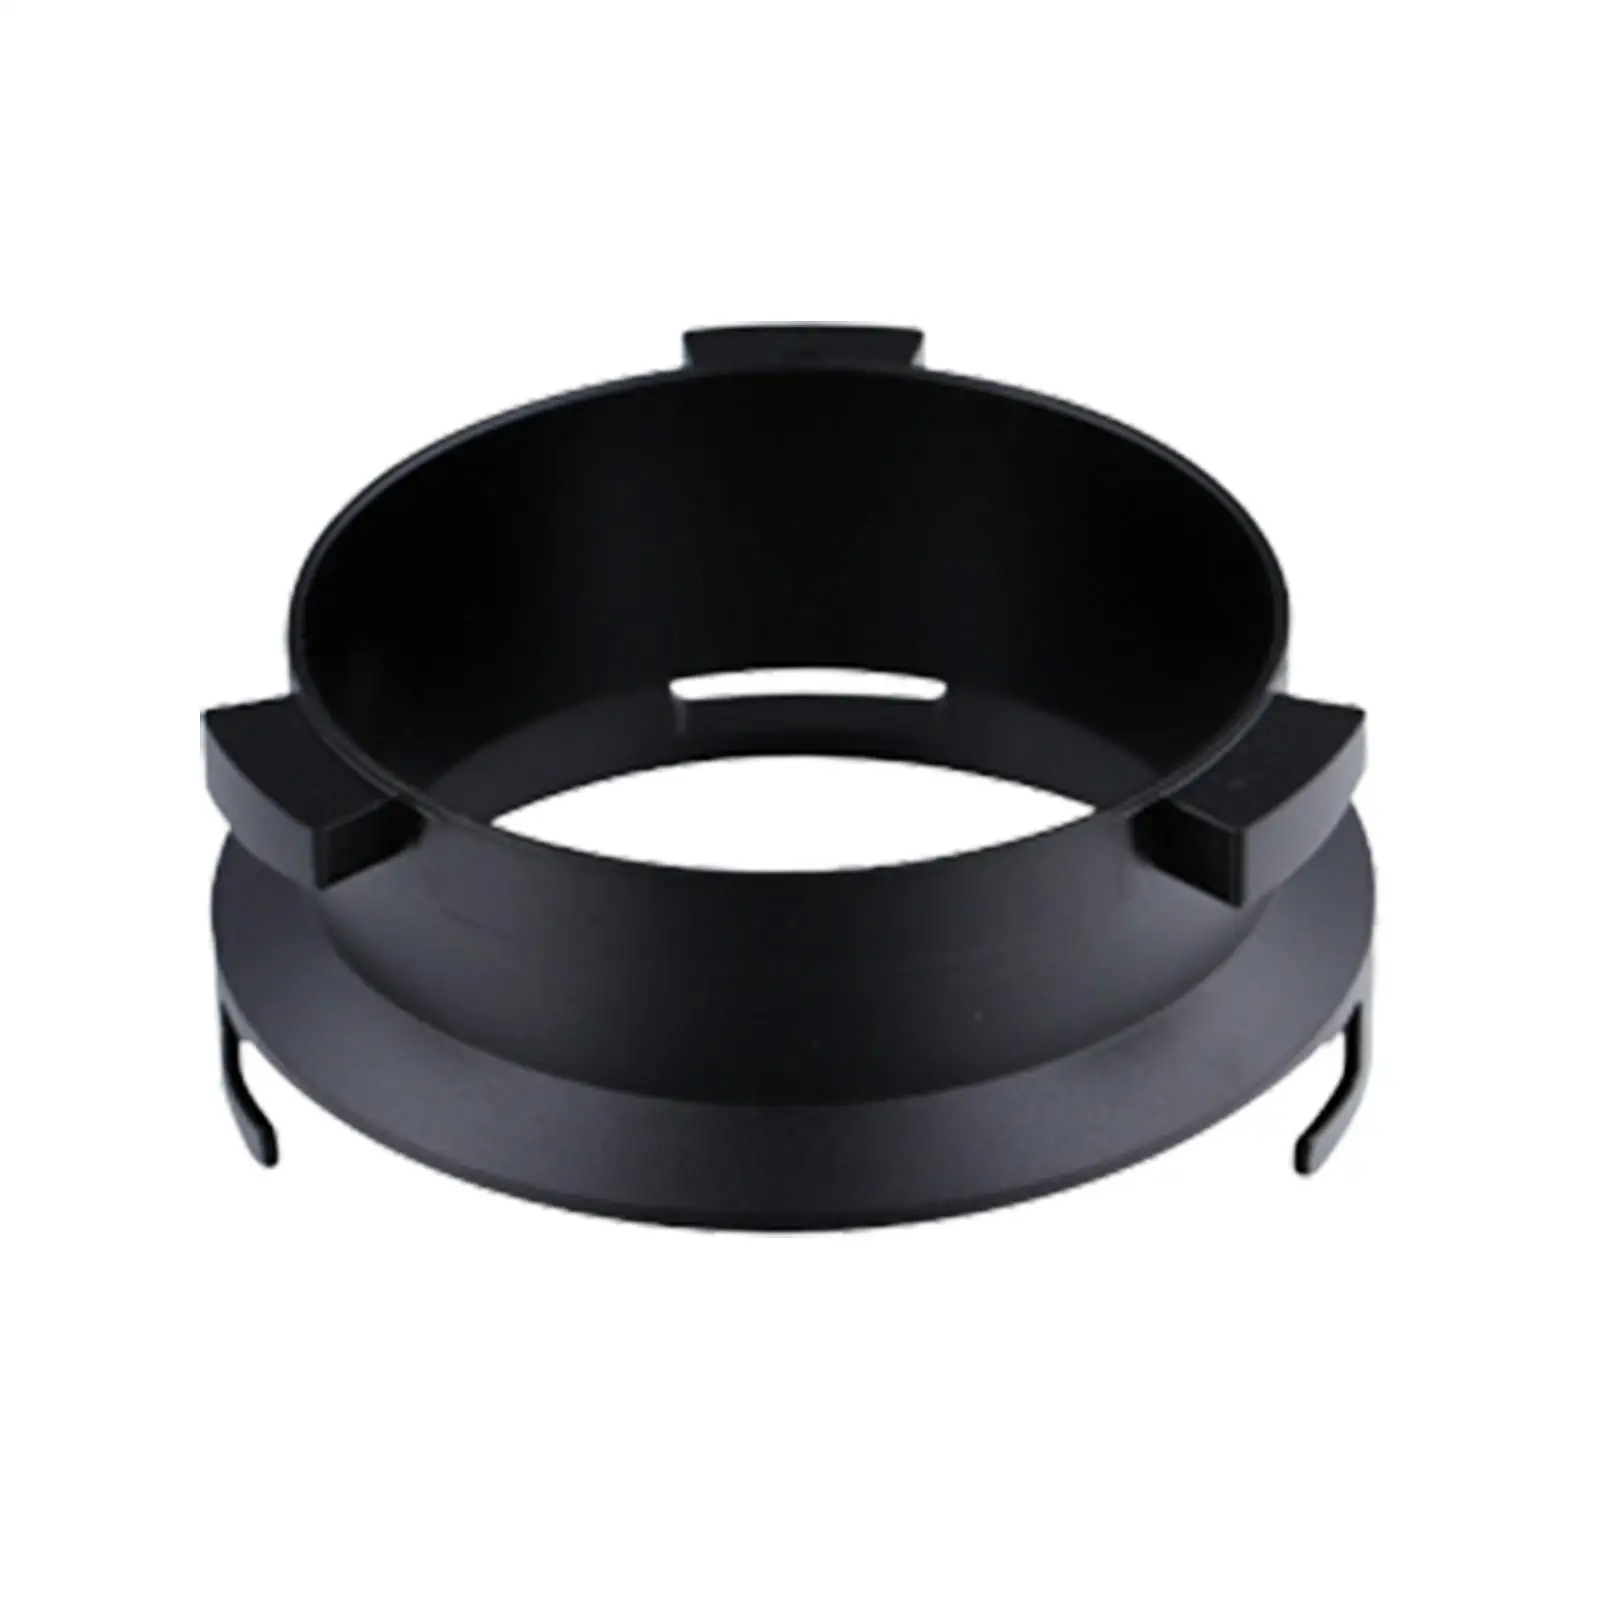 51mm Espresso Dosing Funnel Rotary Design Coffeeware Cafe Tools Coffee Dosing Rings Coffee Dosing Funnel for Office Dining Room